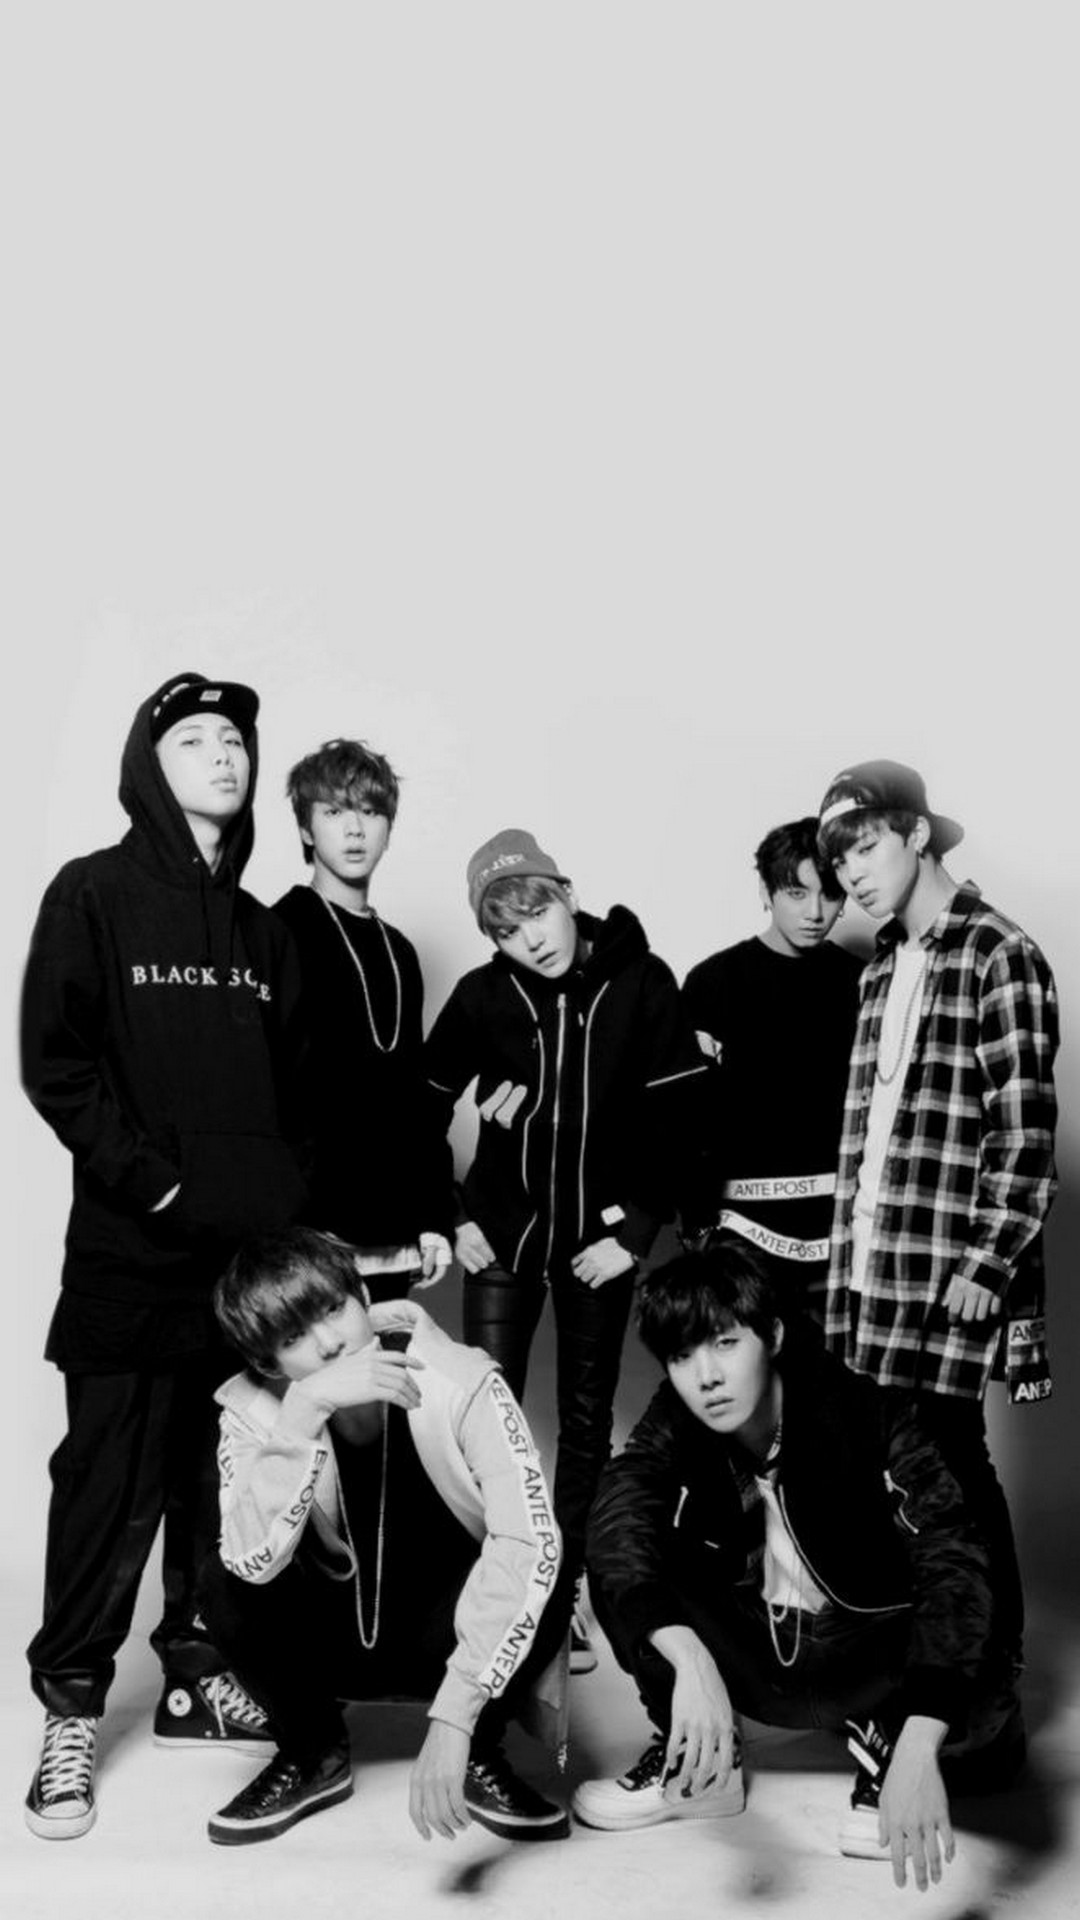 BTS iPhone 6 Wallpaper HD with high-resolution 1080x1920 pixel. Download all Mobile Wallpapers and Use them as wallpapers for your iPhone, Tablet, iPad, Android and other mobile devices